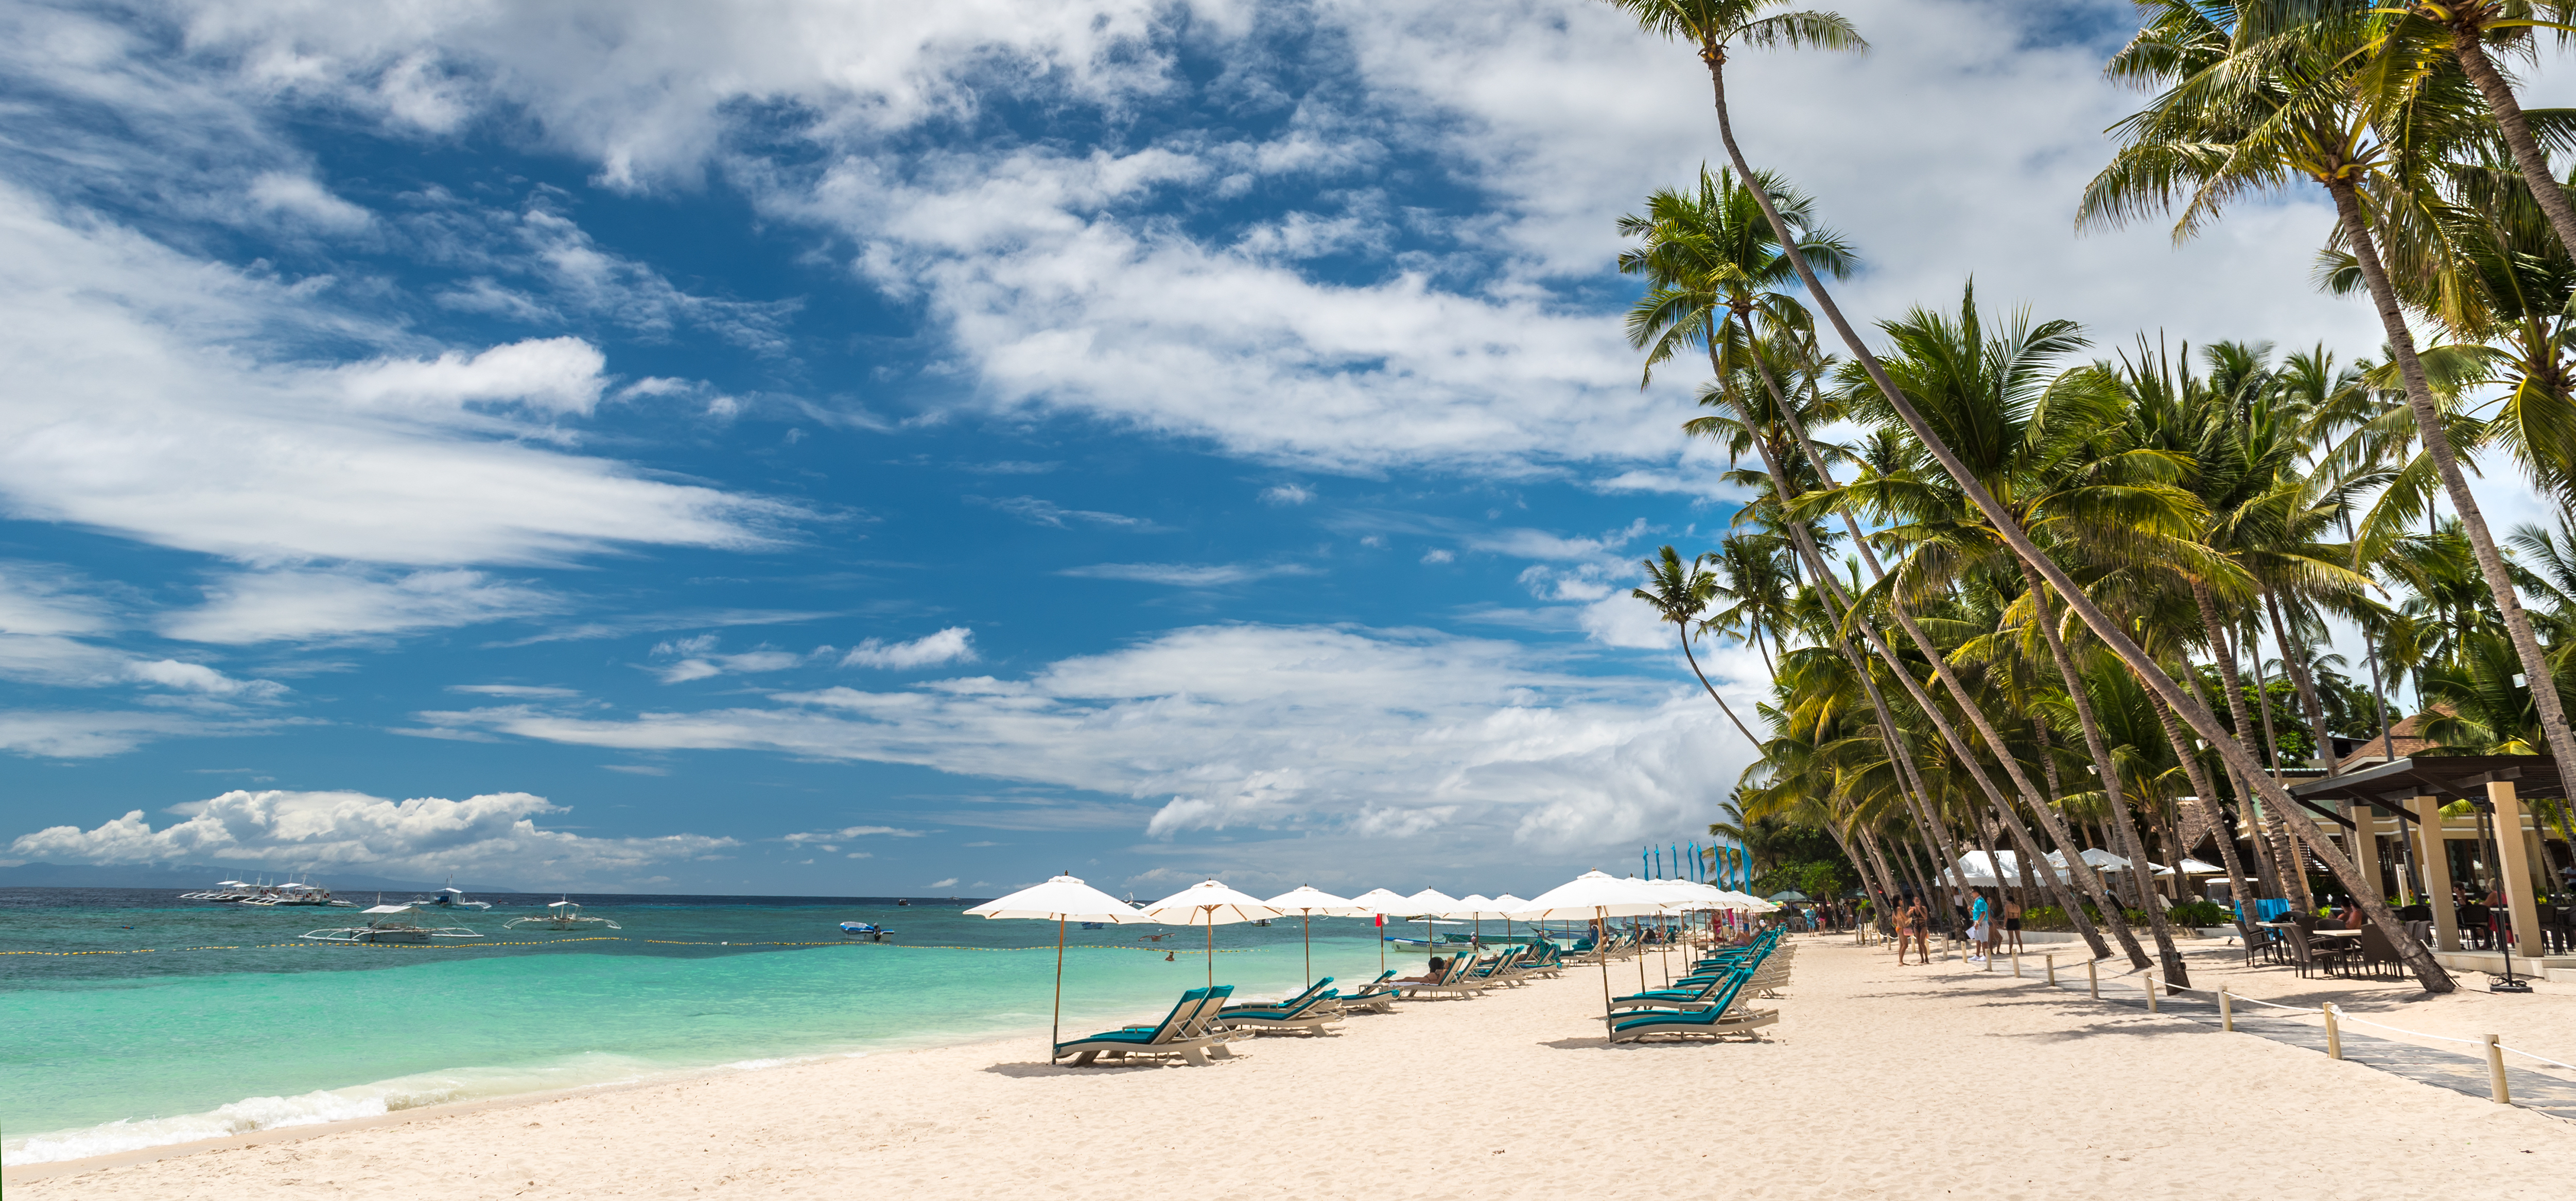 10 Best Resorts Philippines: With Po...